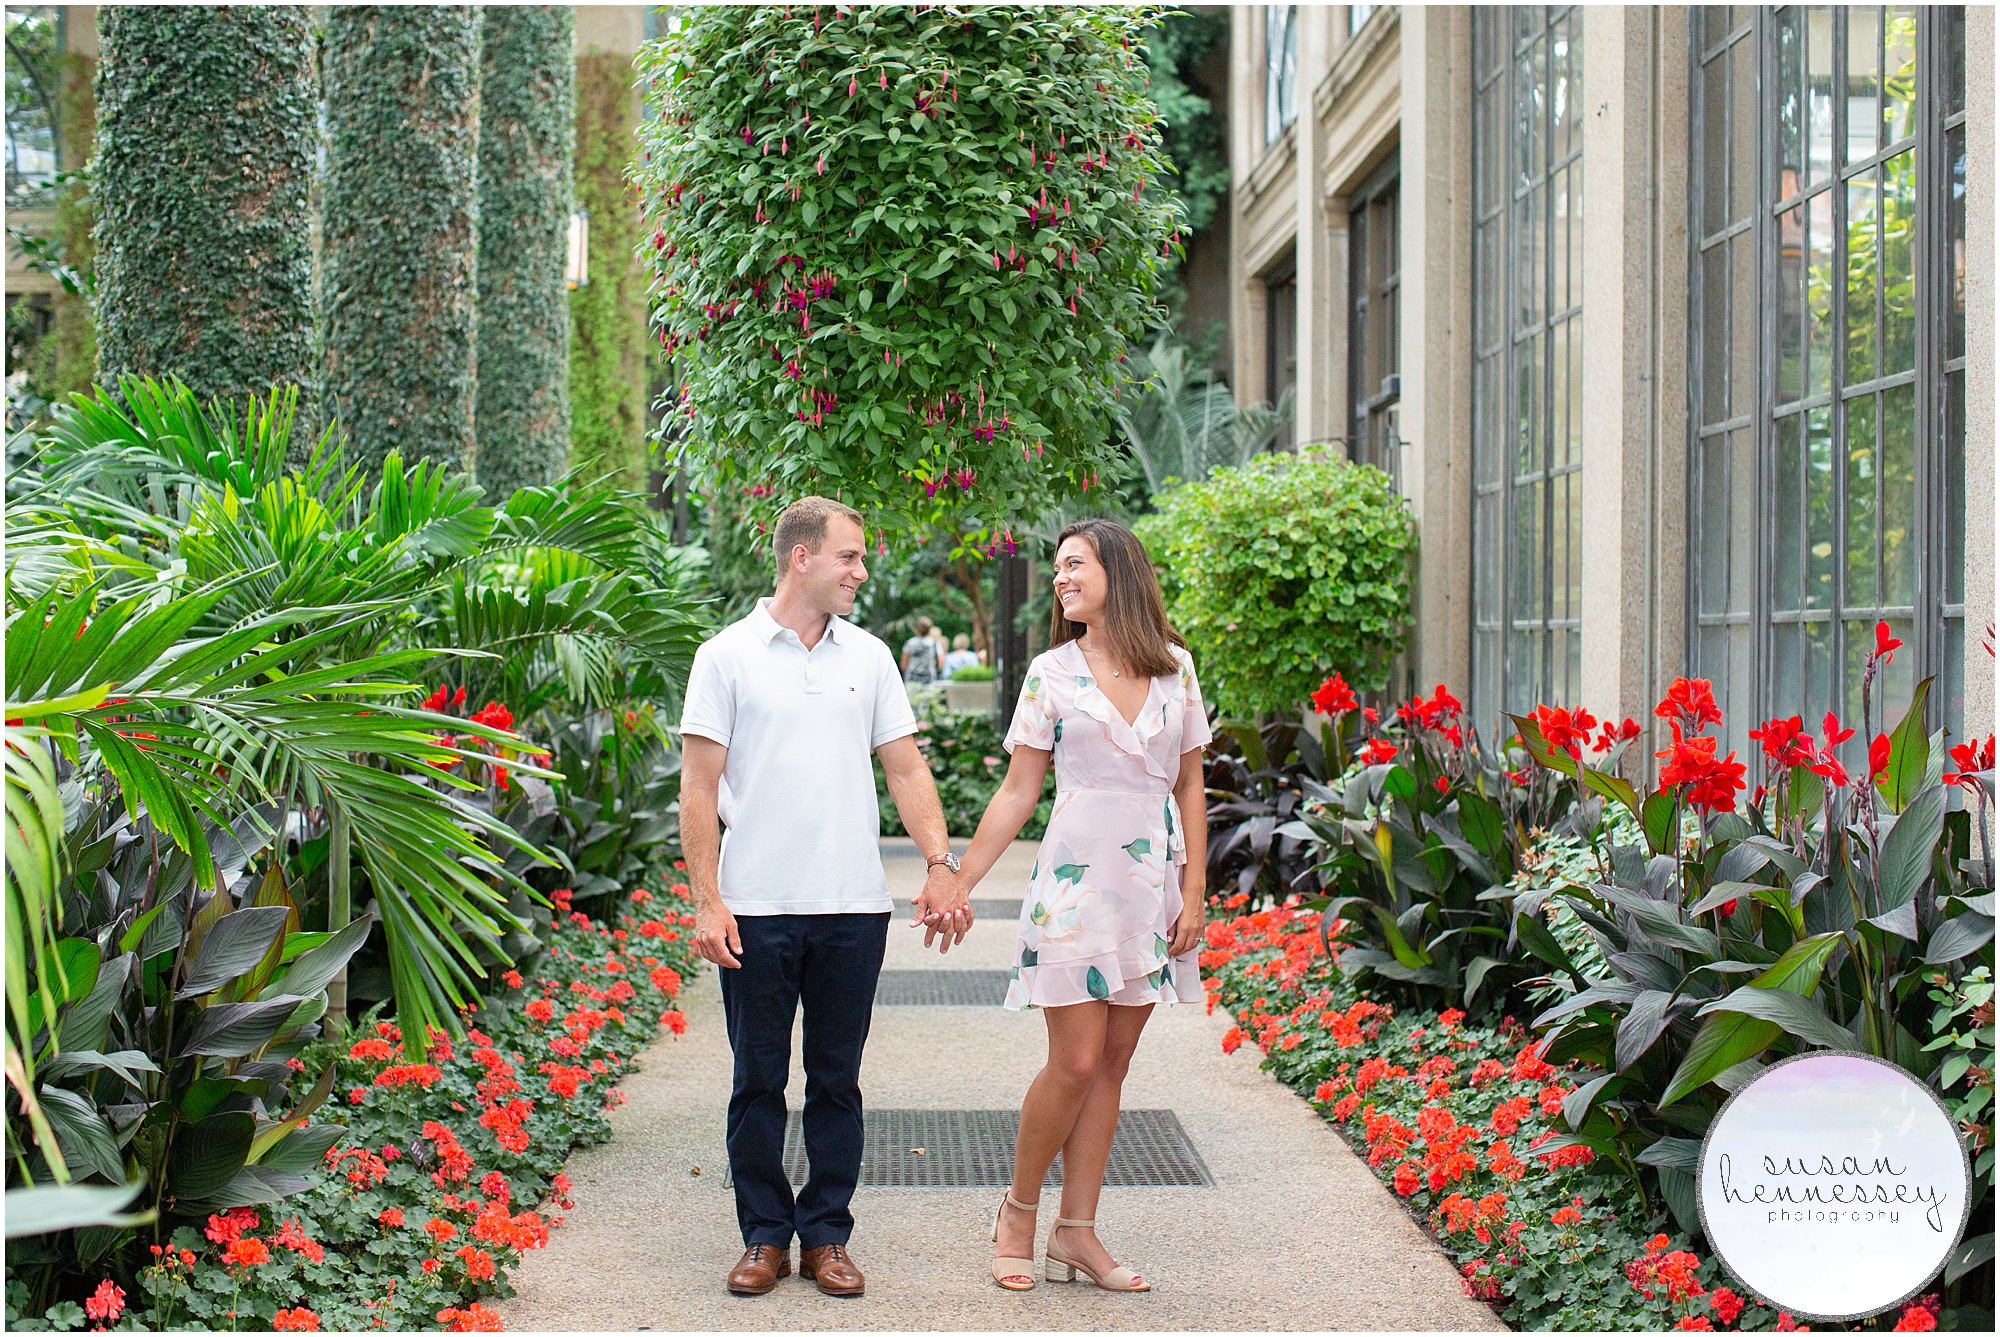 An engaged couple at Longwood Gardens